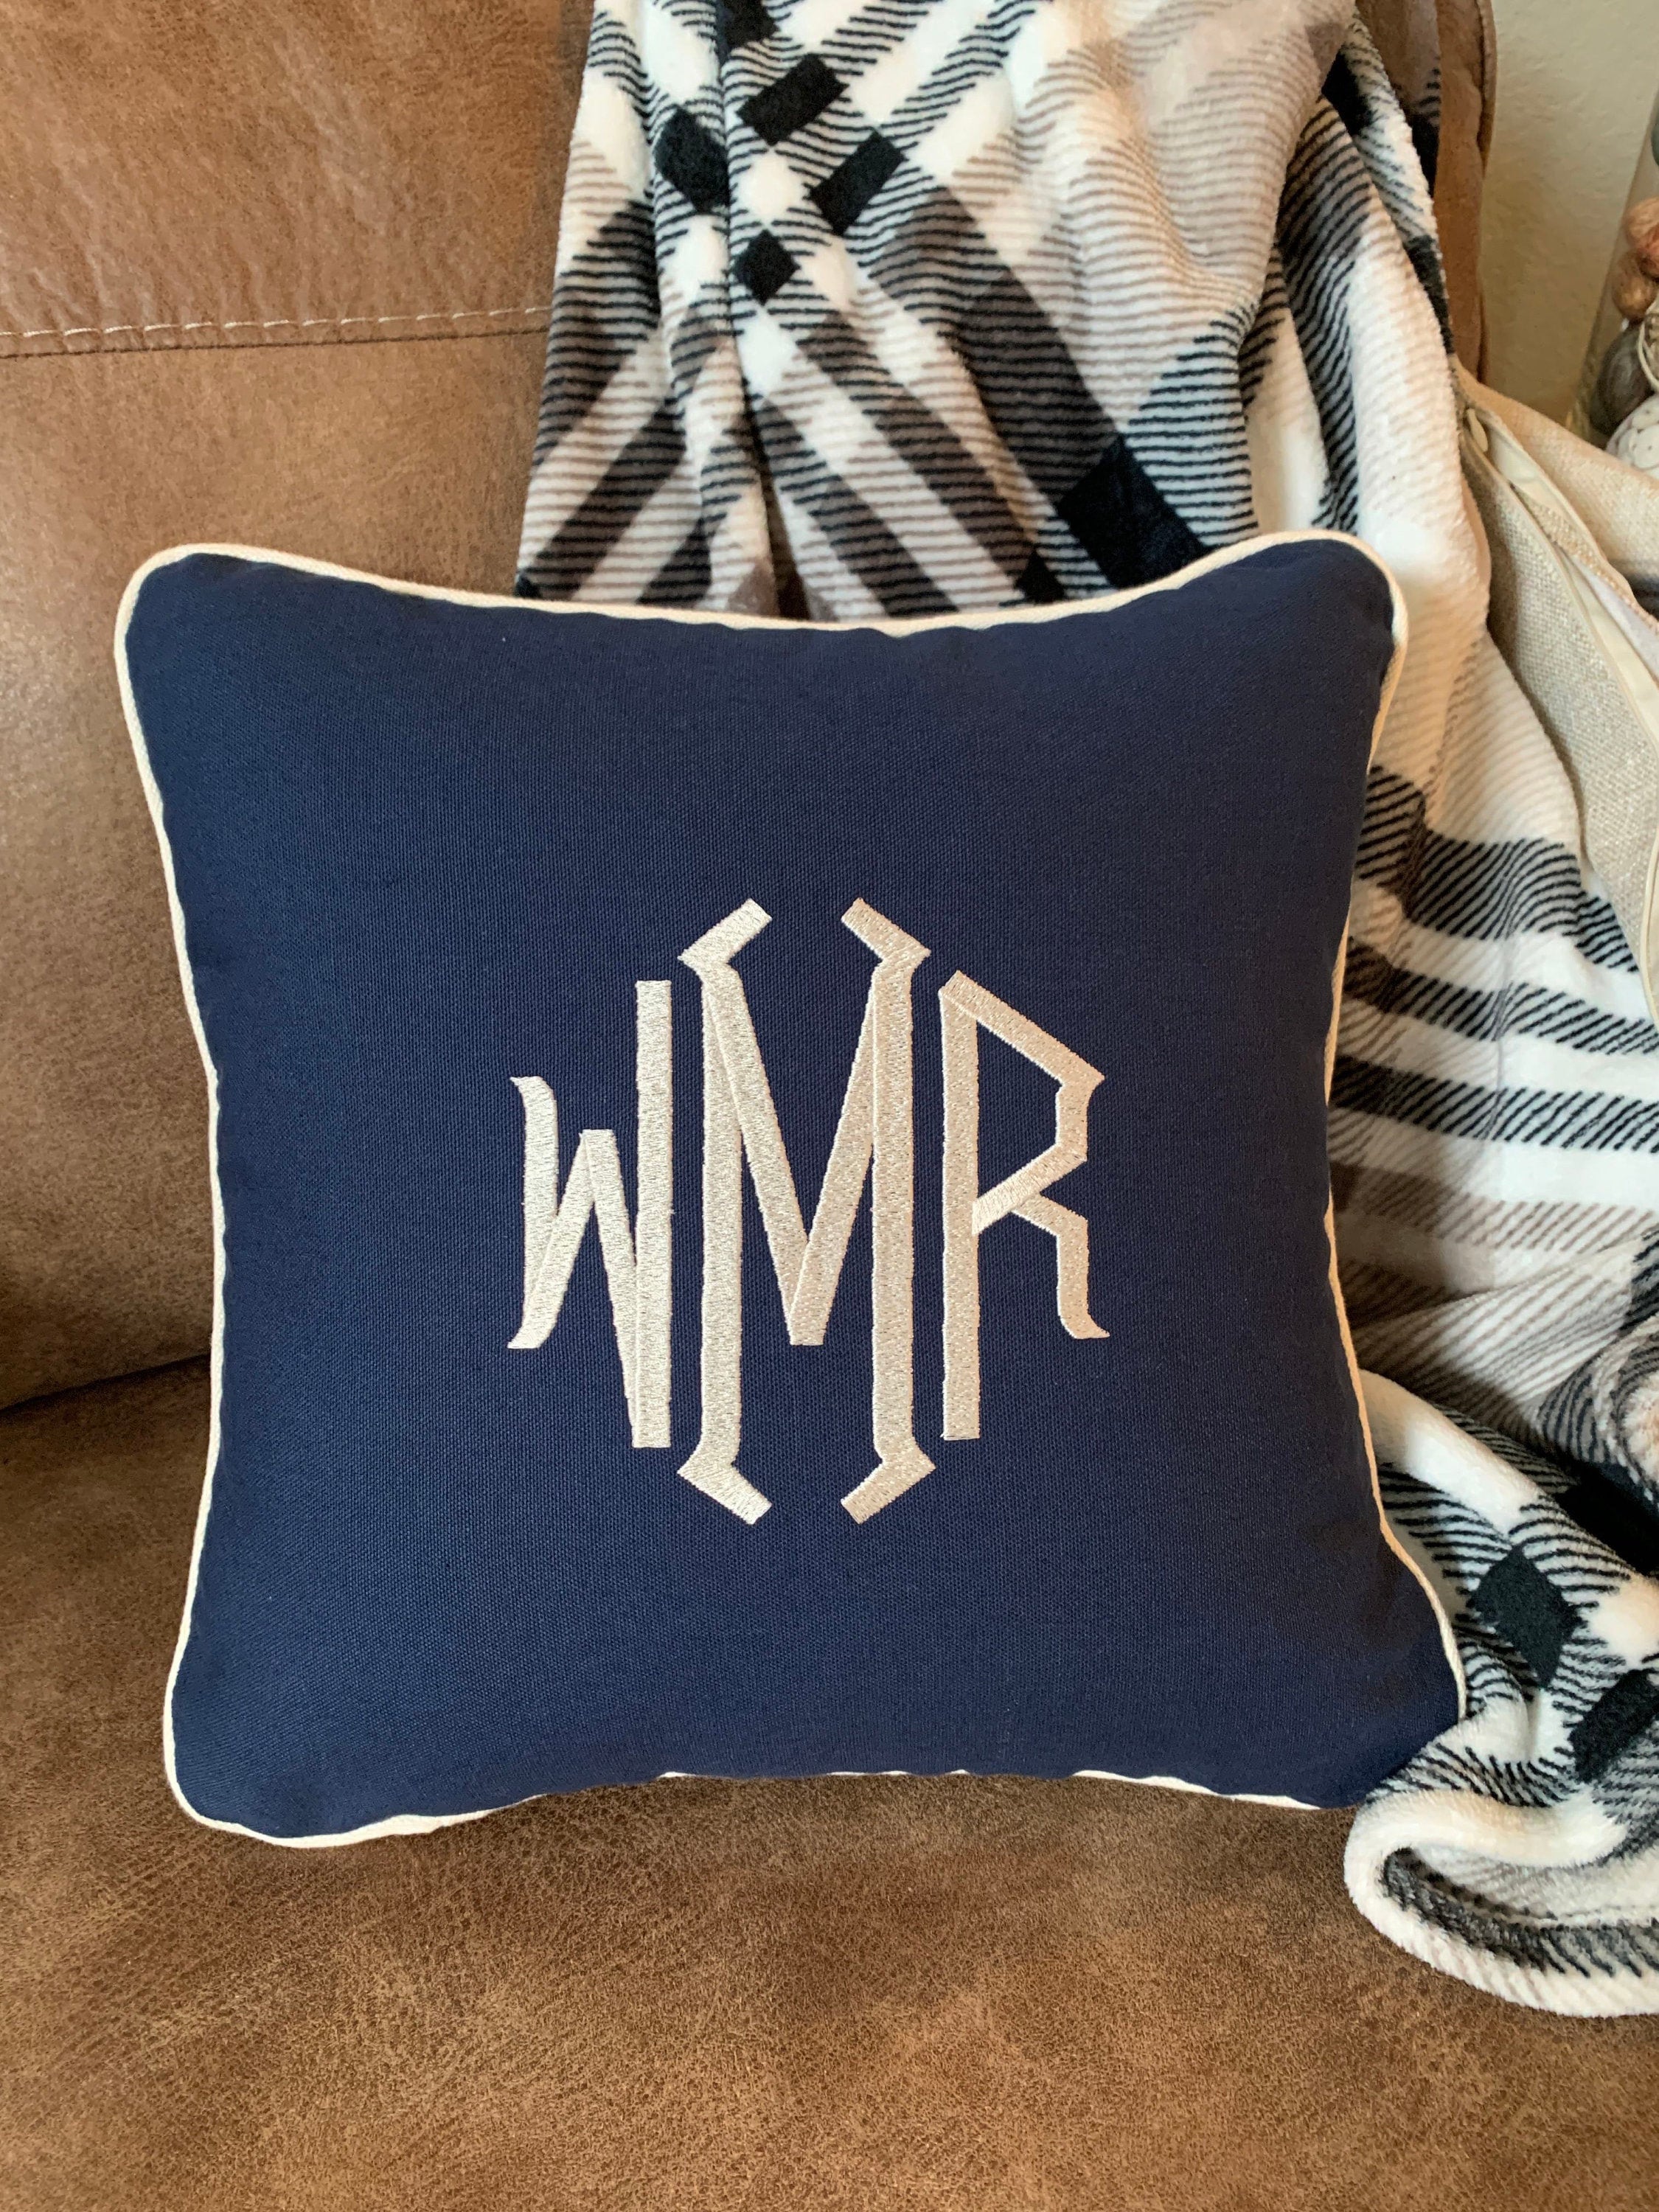 Monogram Pillow 16 x 16 Navy Blue Canvas Natural Off White | Etsy